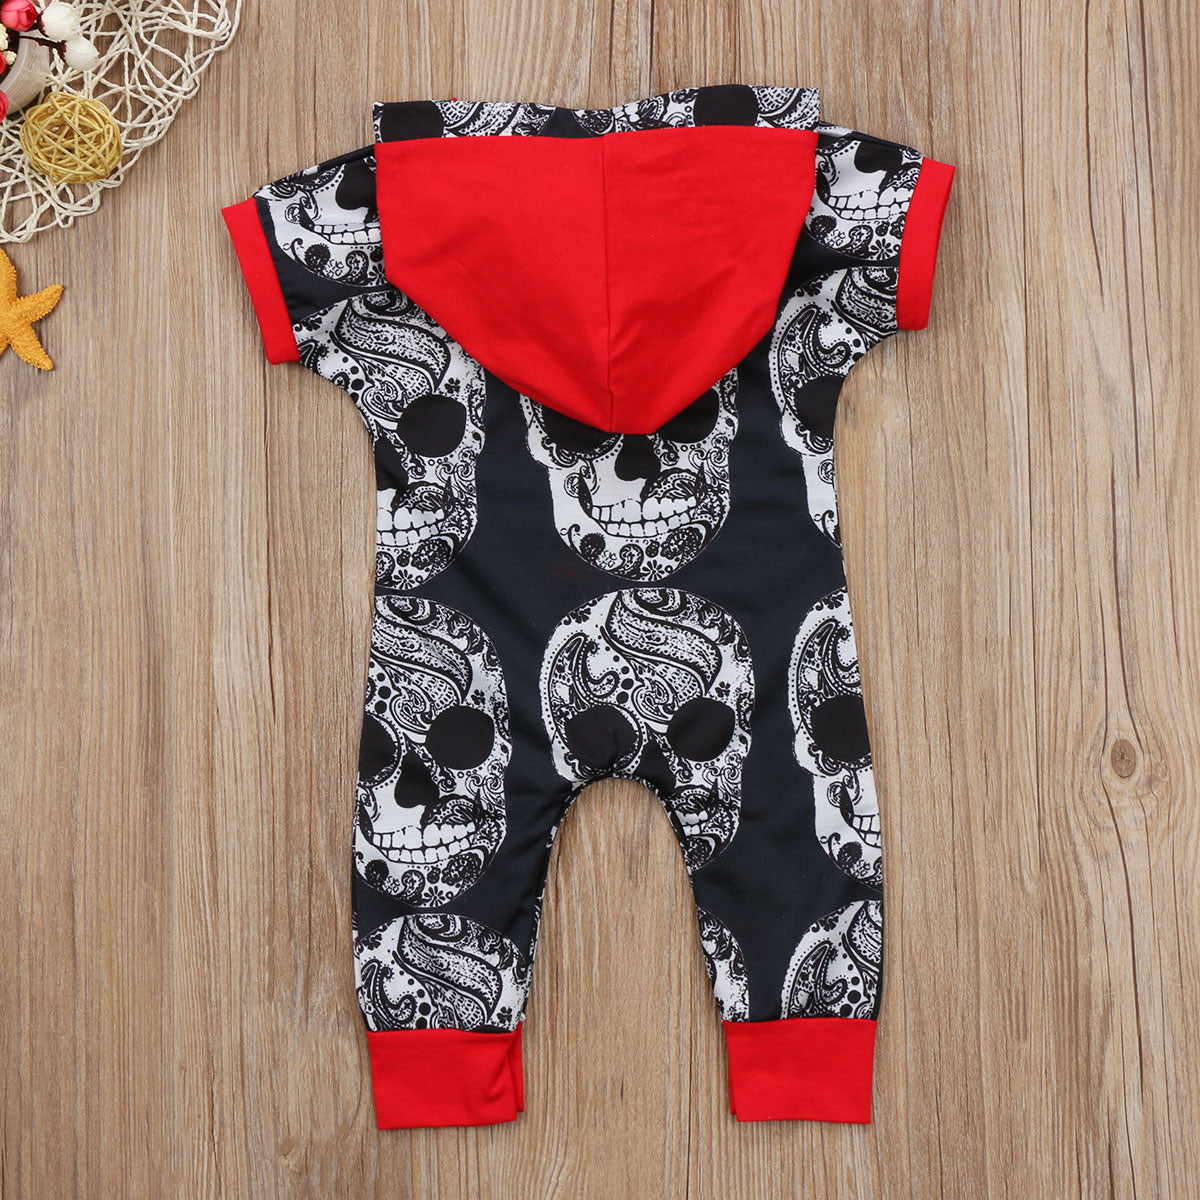 Toddler Baby Boys Skull One pieces Cotton Hooded Romper Jumpsuit Harem Outfits